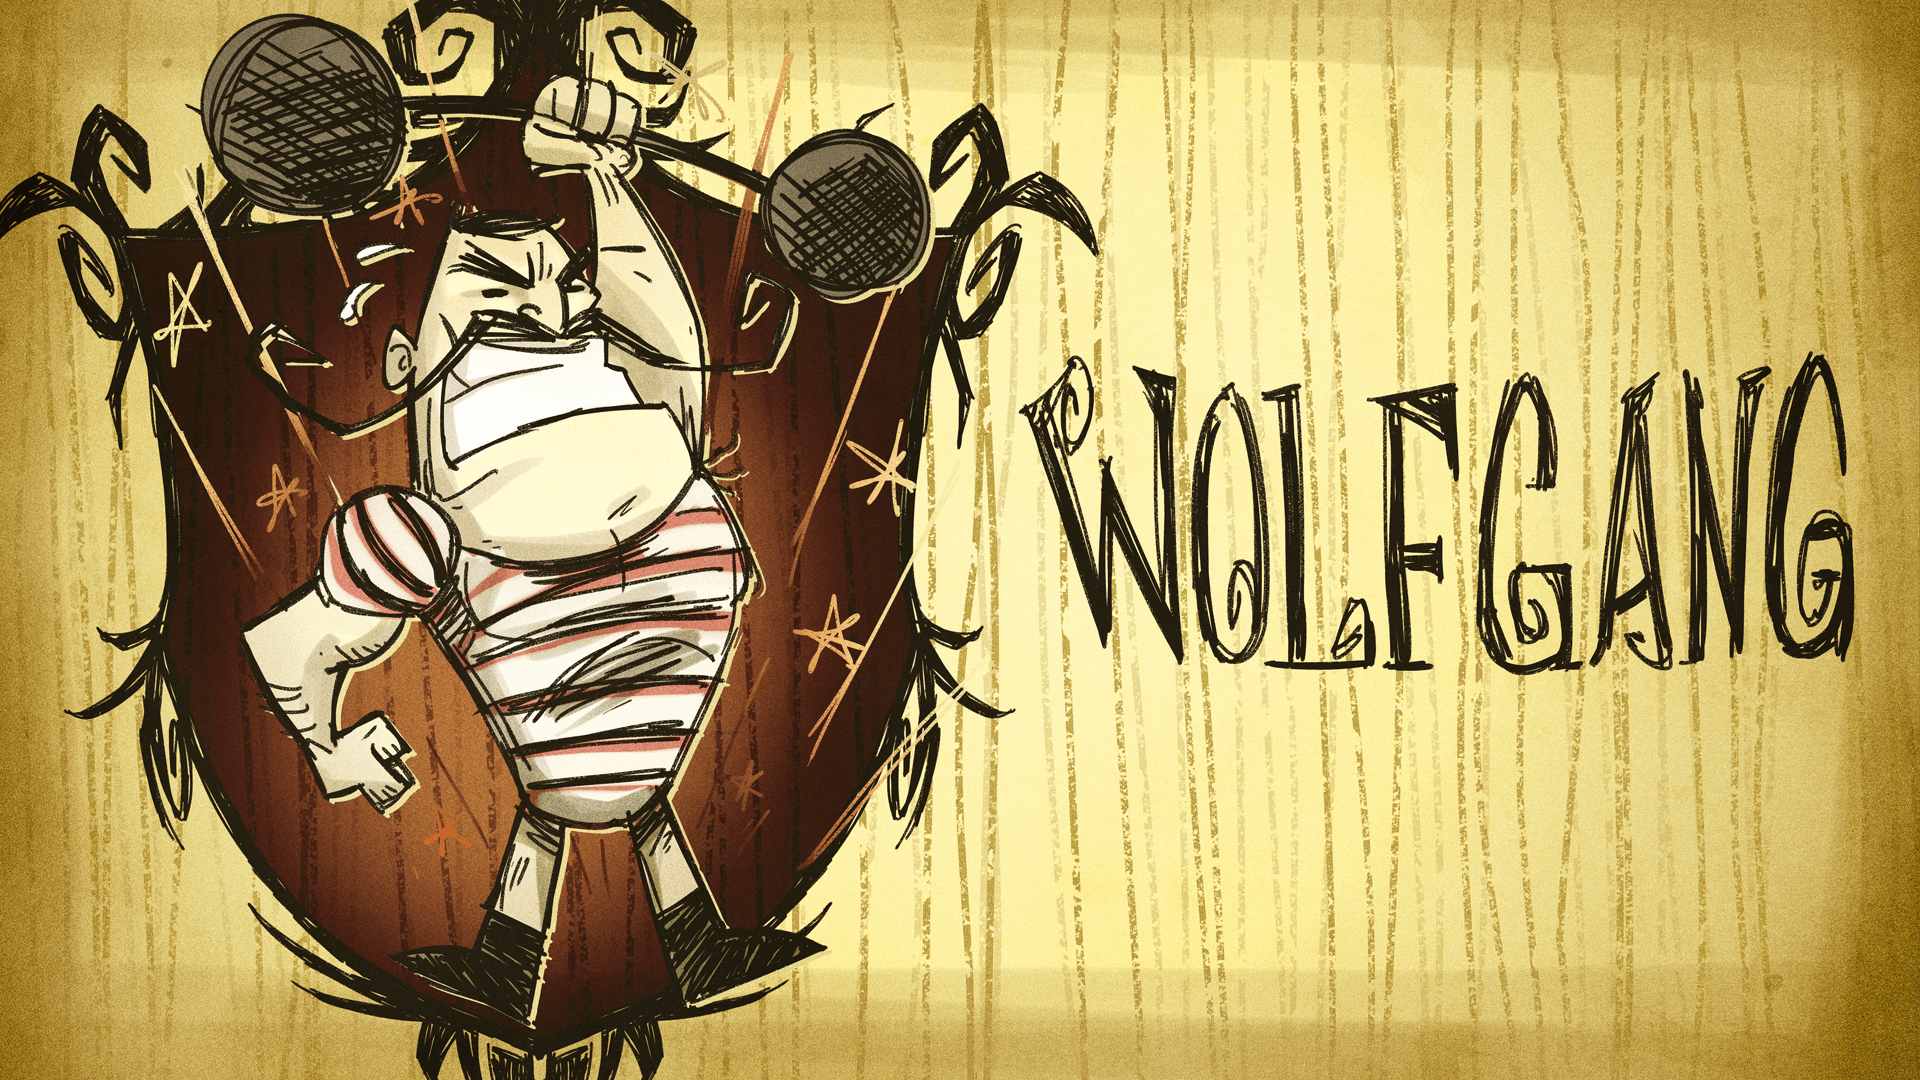 Here's my collection of Don't starve wallpapers. : dontstarve